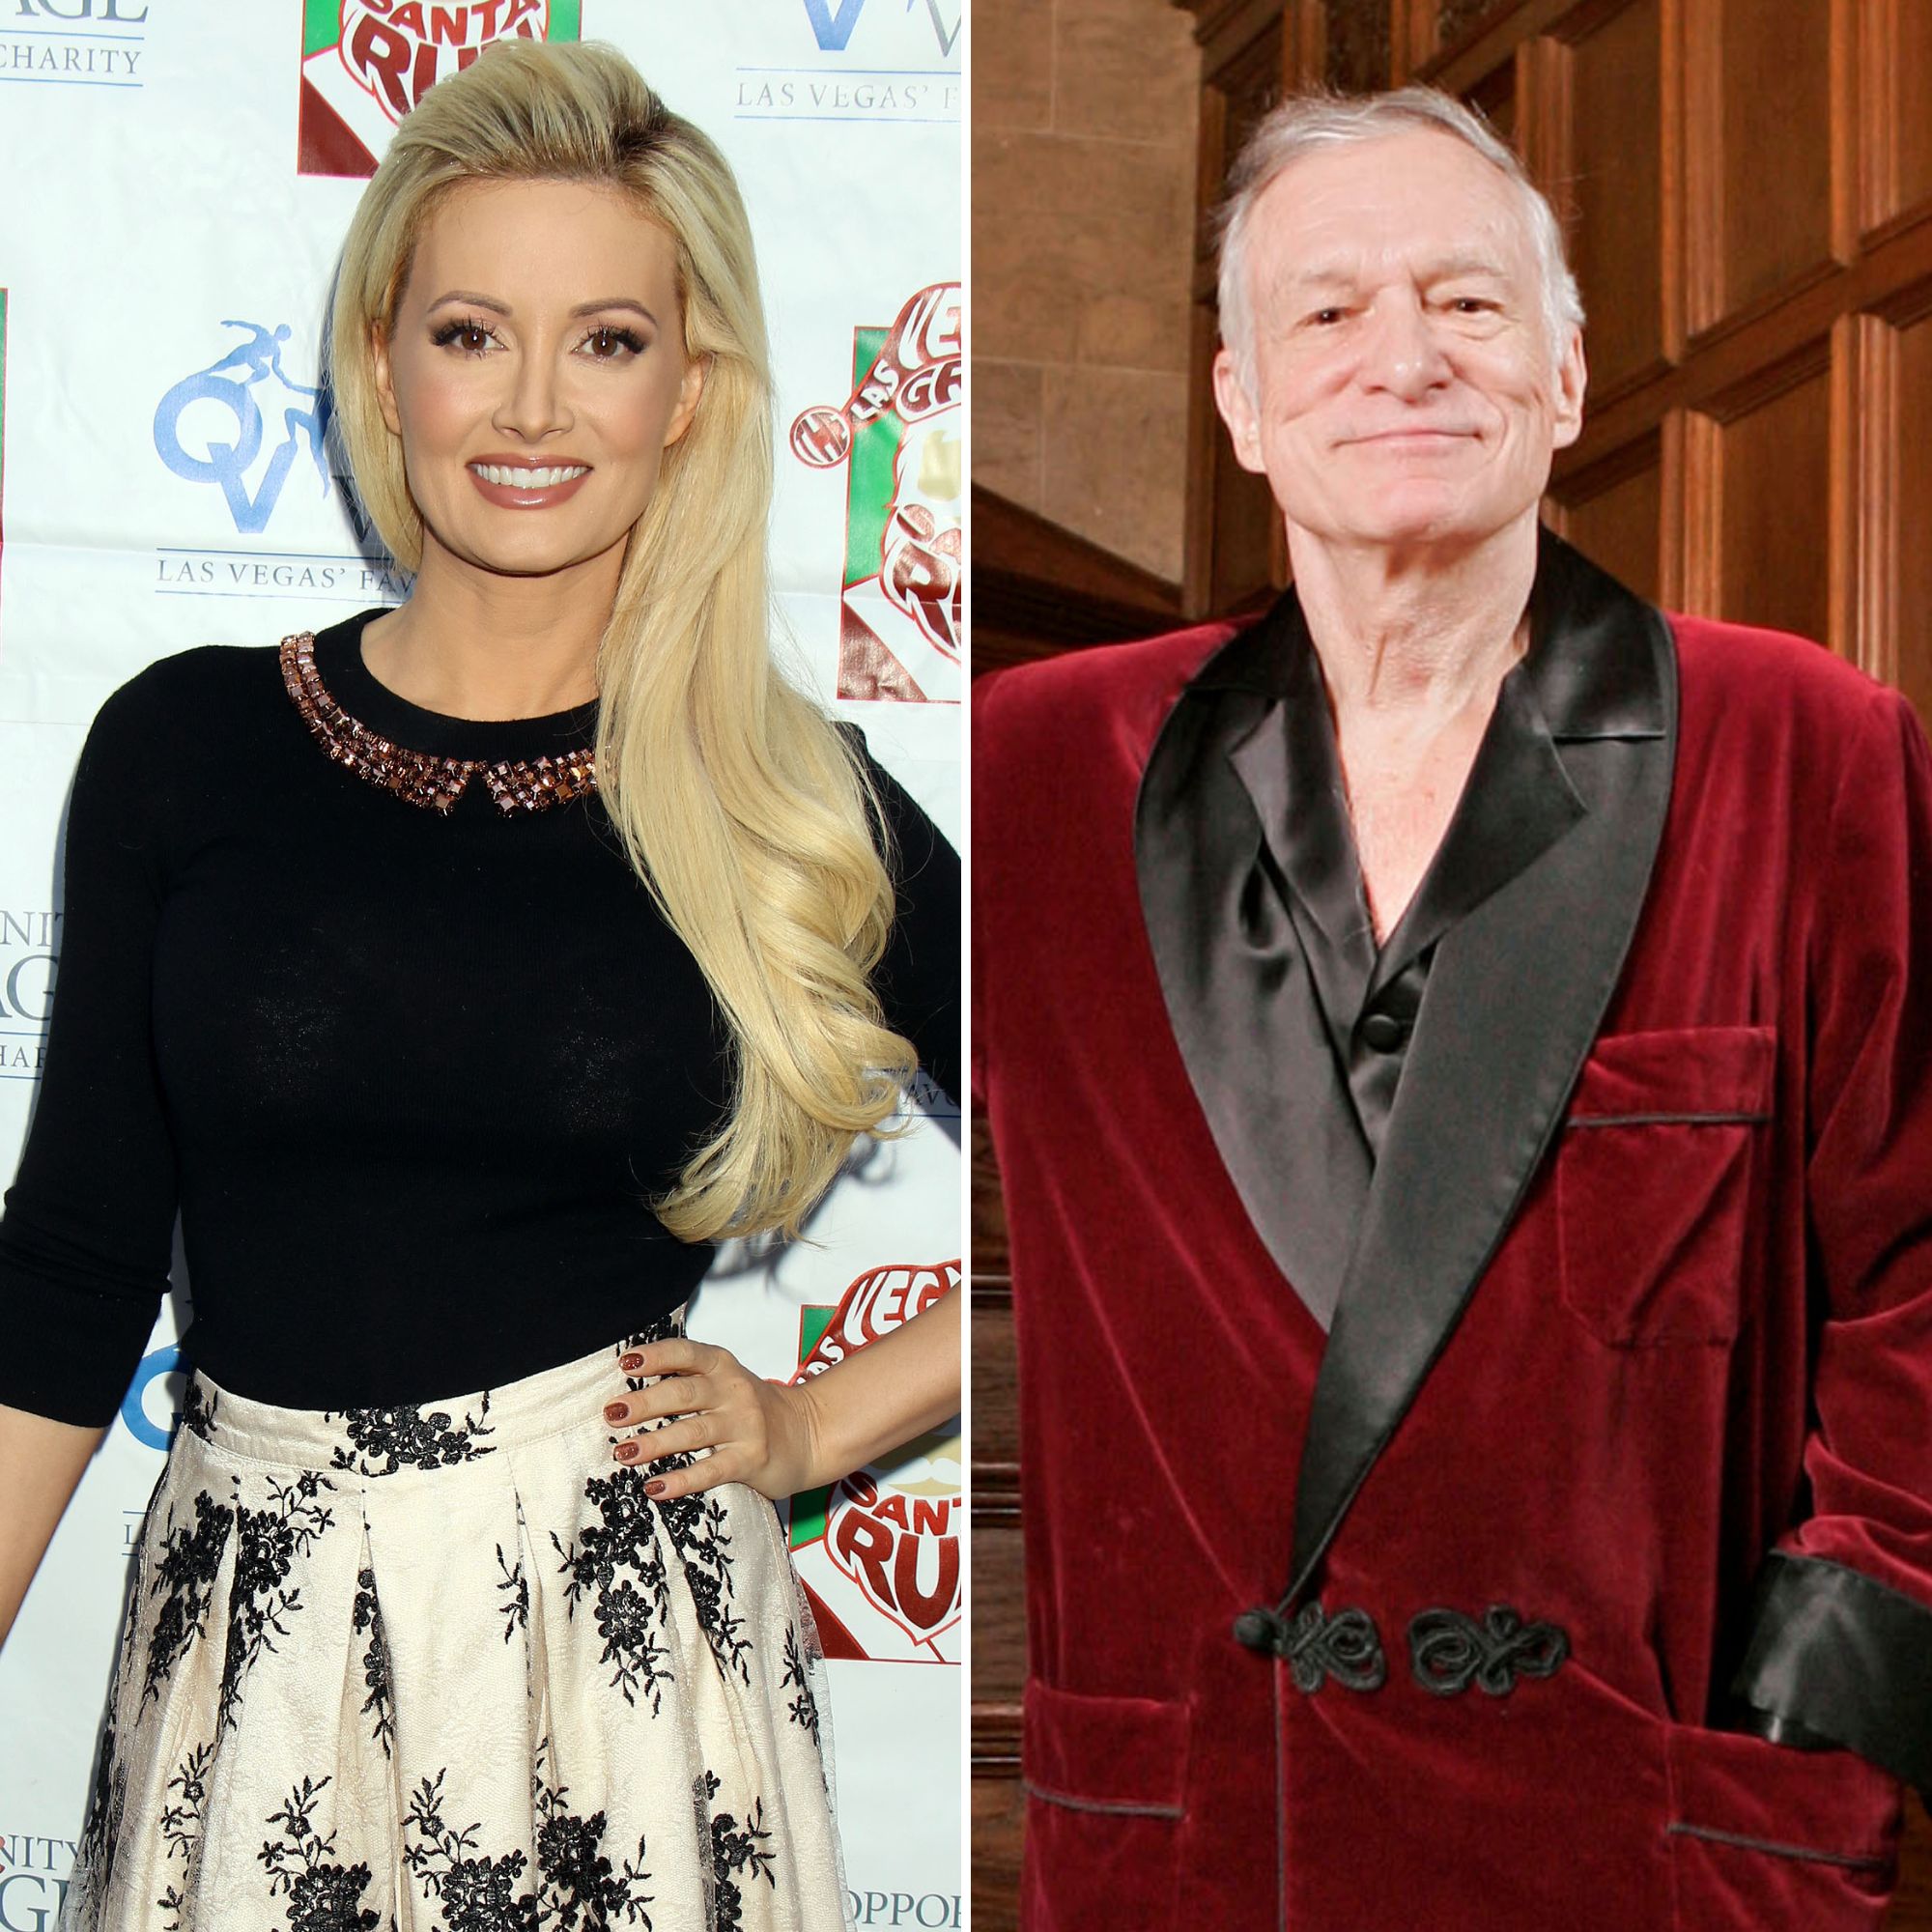 Holly Madisons Quotes on Sex Life With Hugh Hefner pic